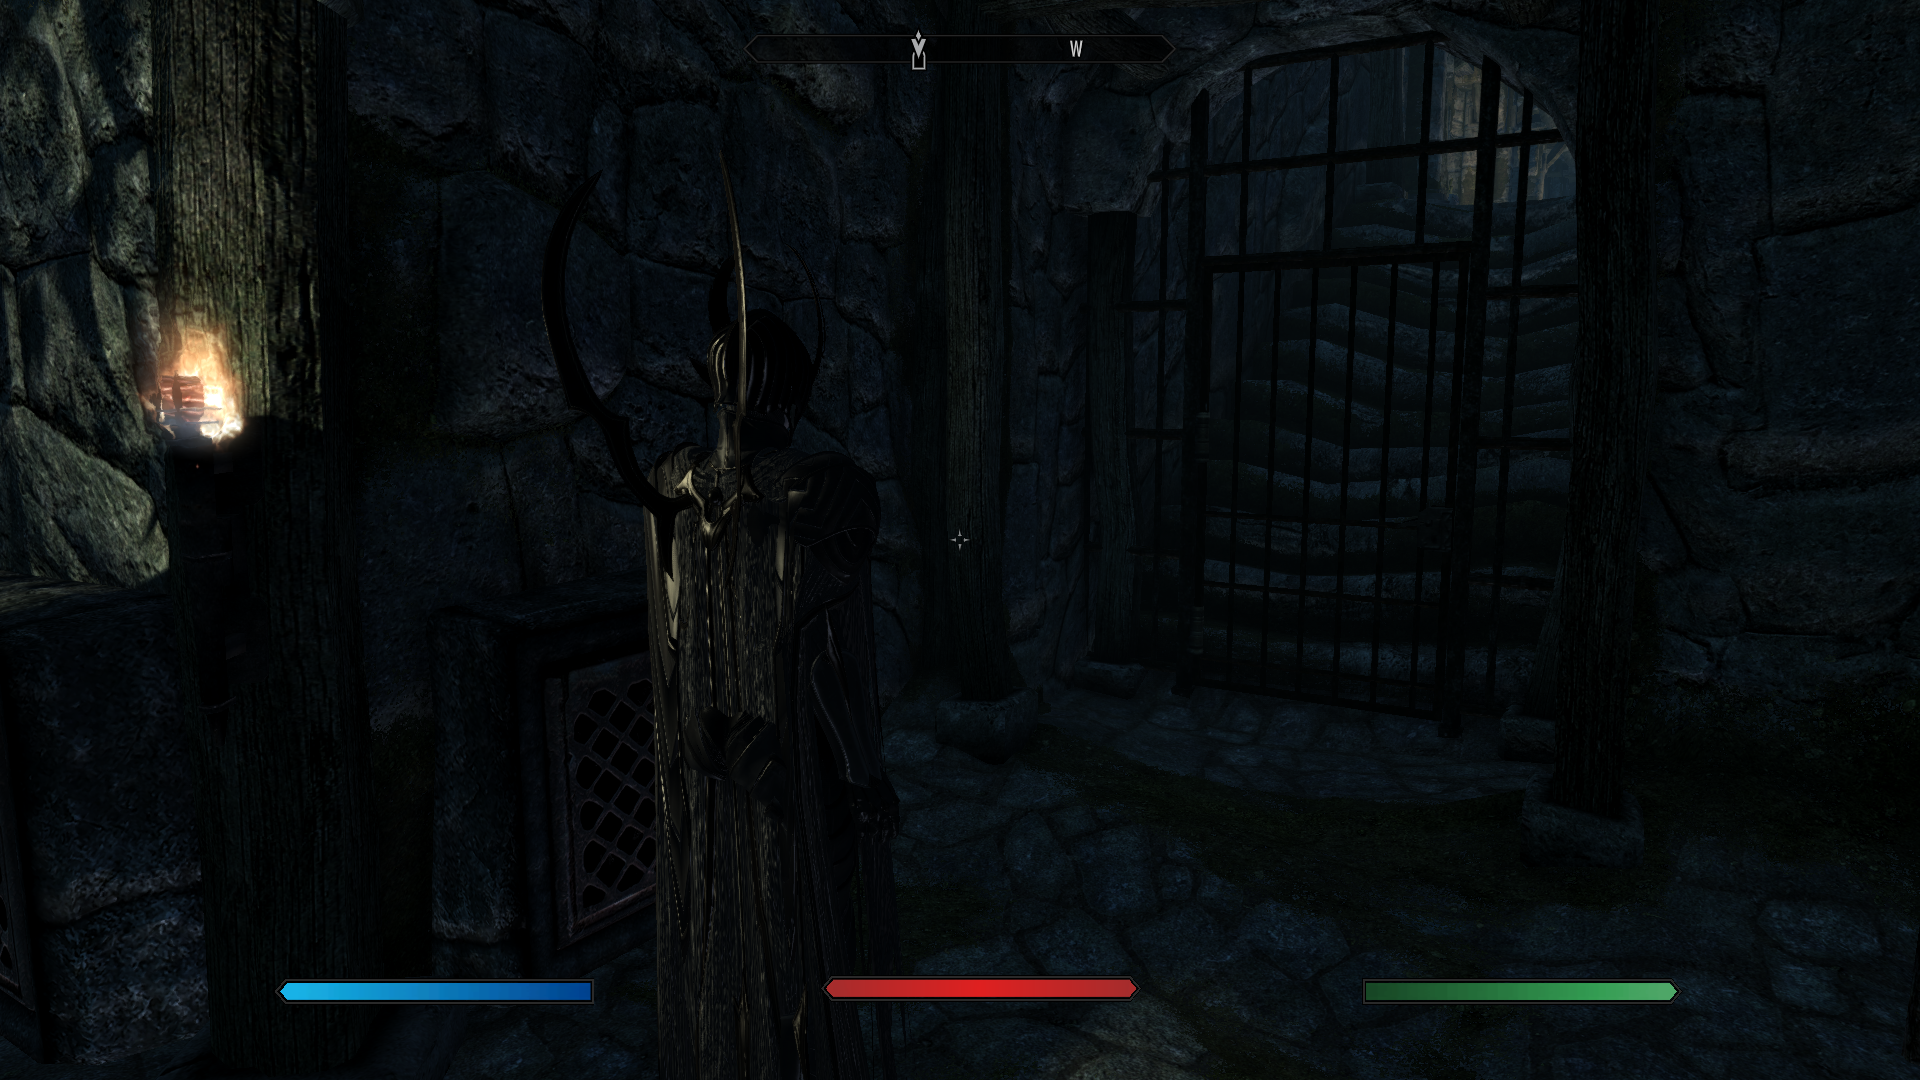 913153261_SkyrimSpecialEdition1_21_20221_01_19AM.png.58d004734b495d61775024dc59c963be.png